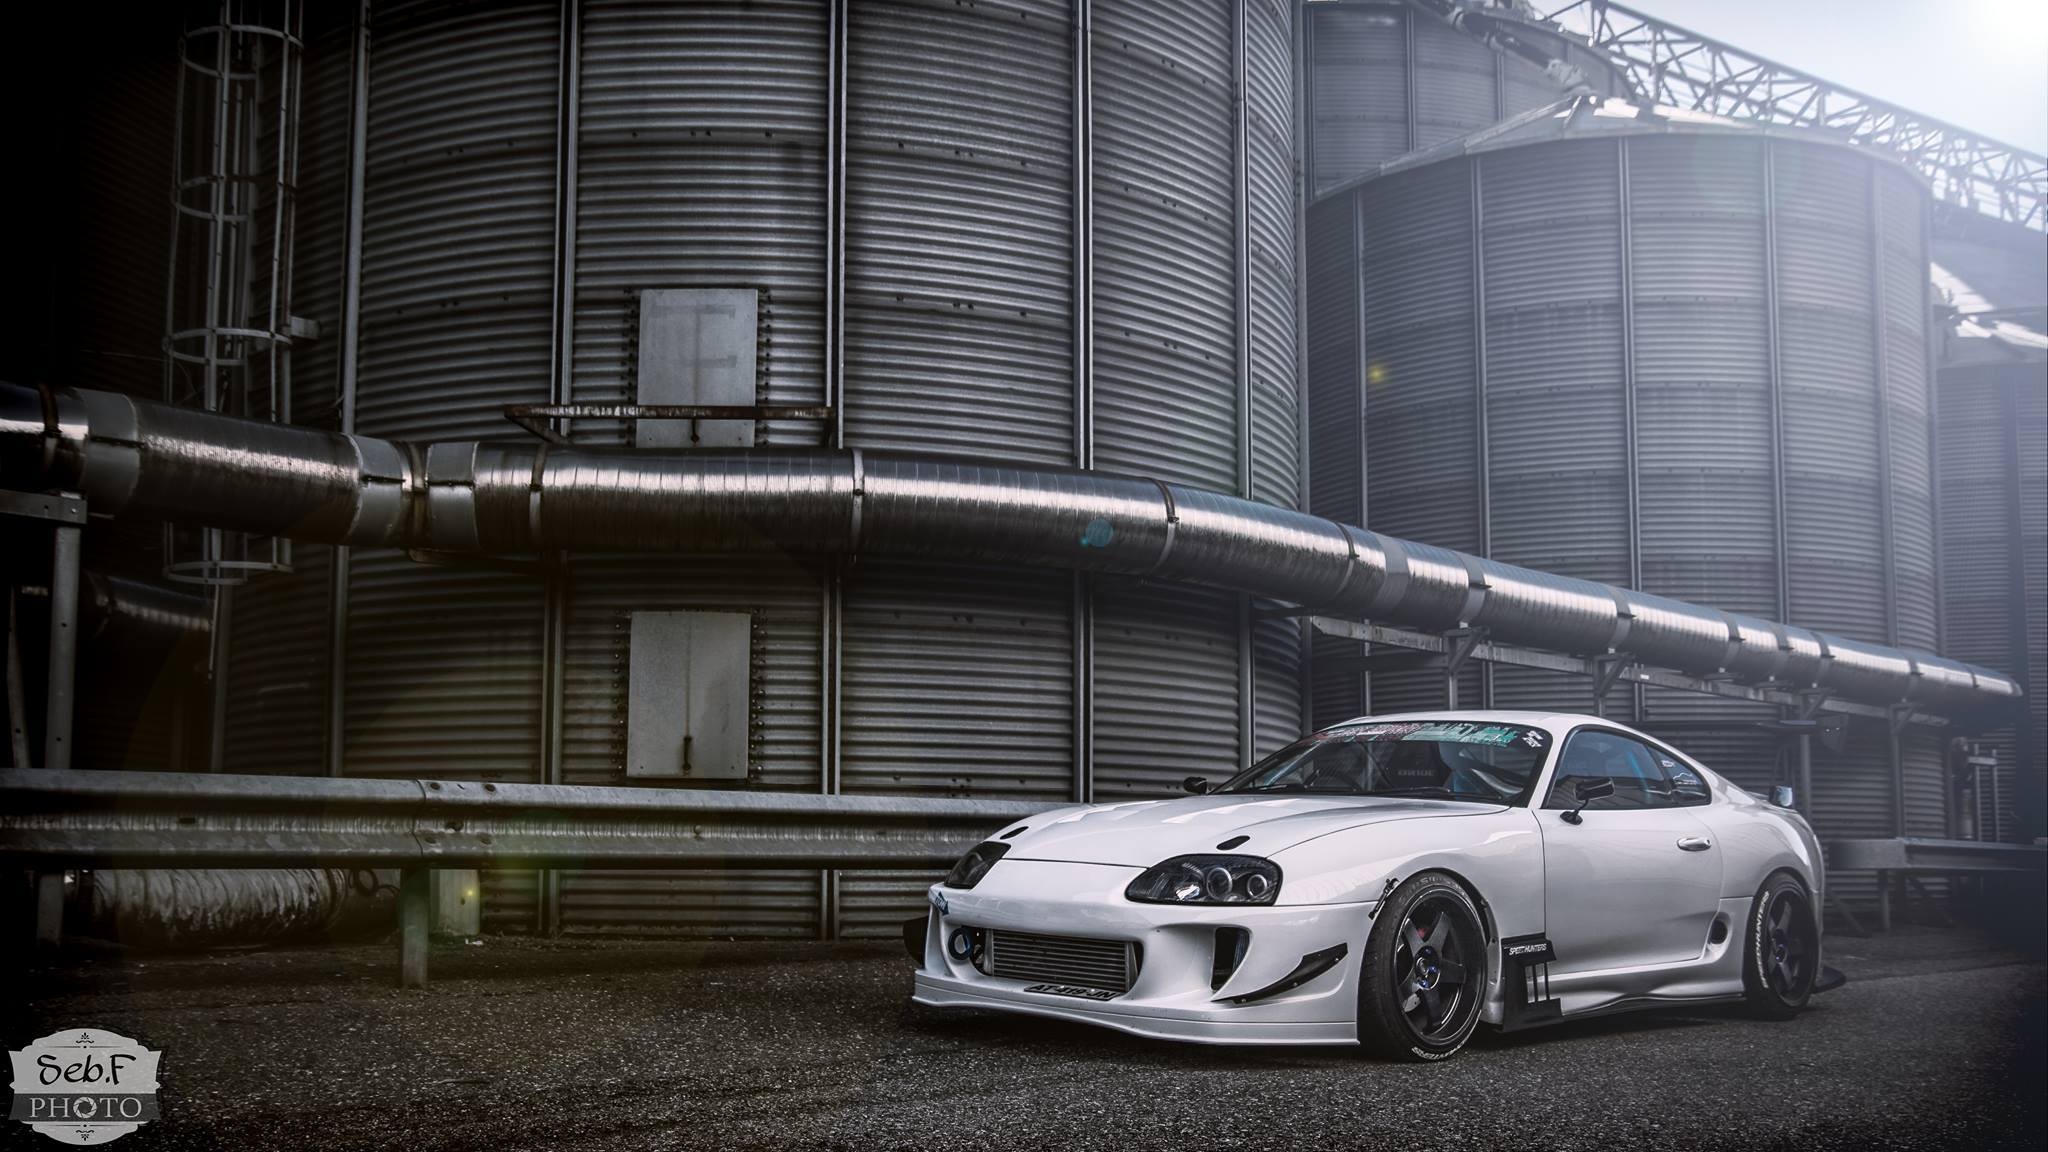 General 2048x1152 car Toyota Supra Toyota vehicle industrial silver cars Japanese cars sports car